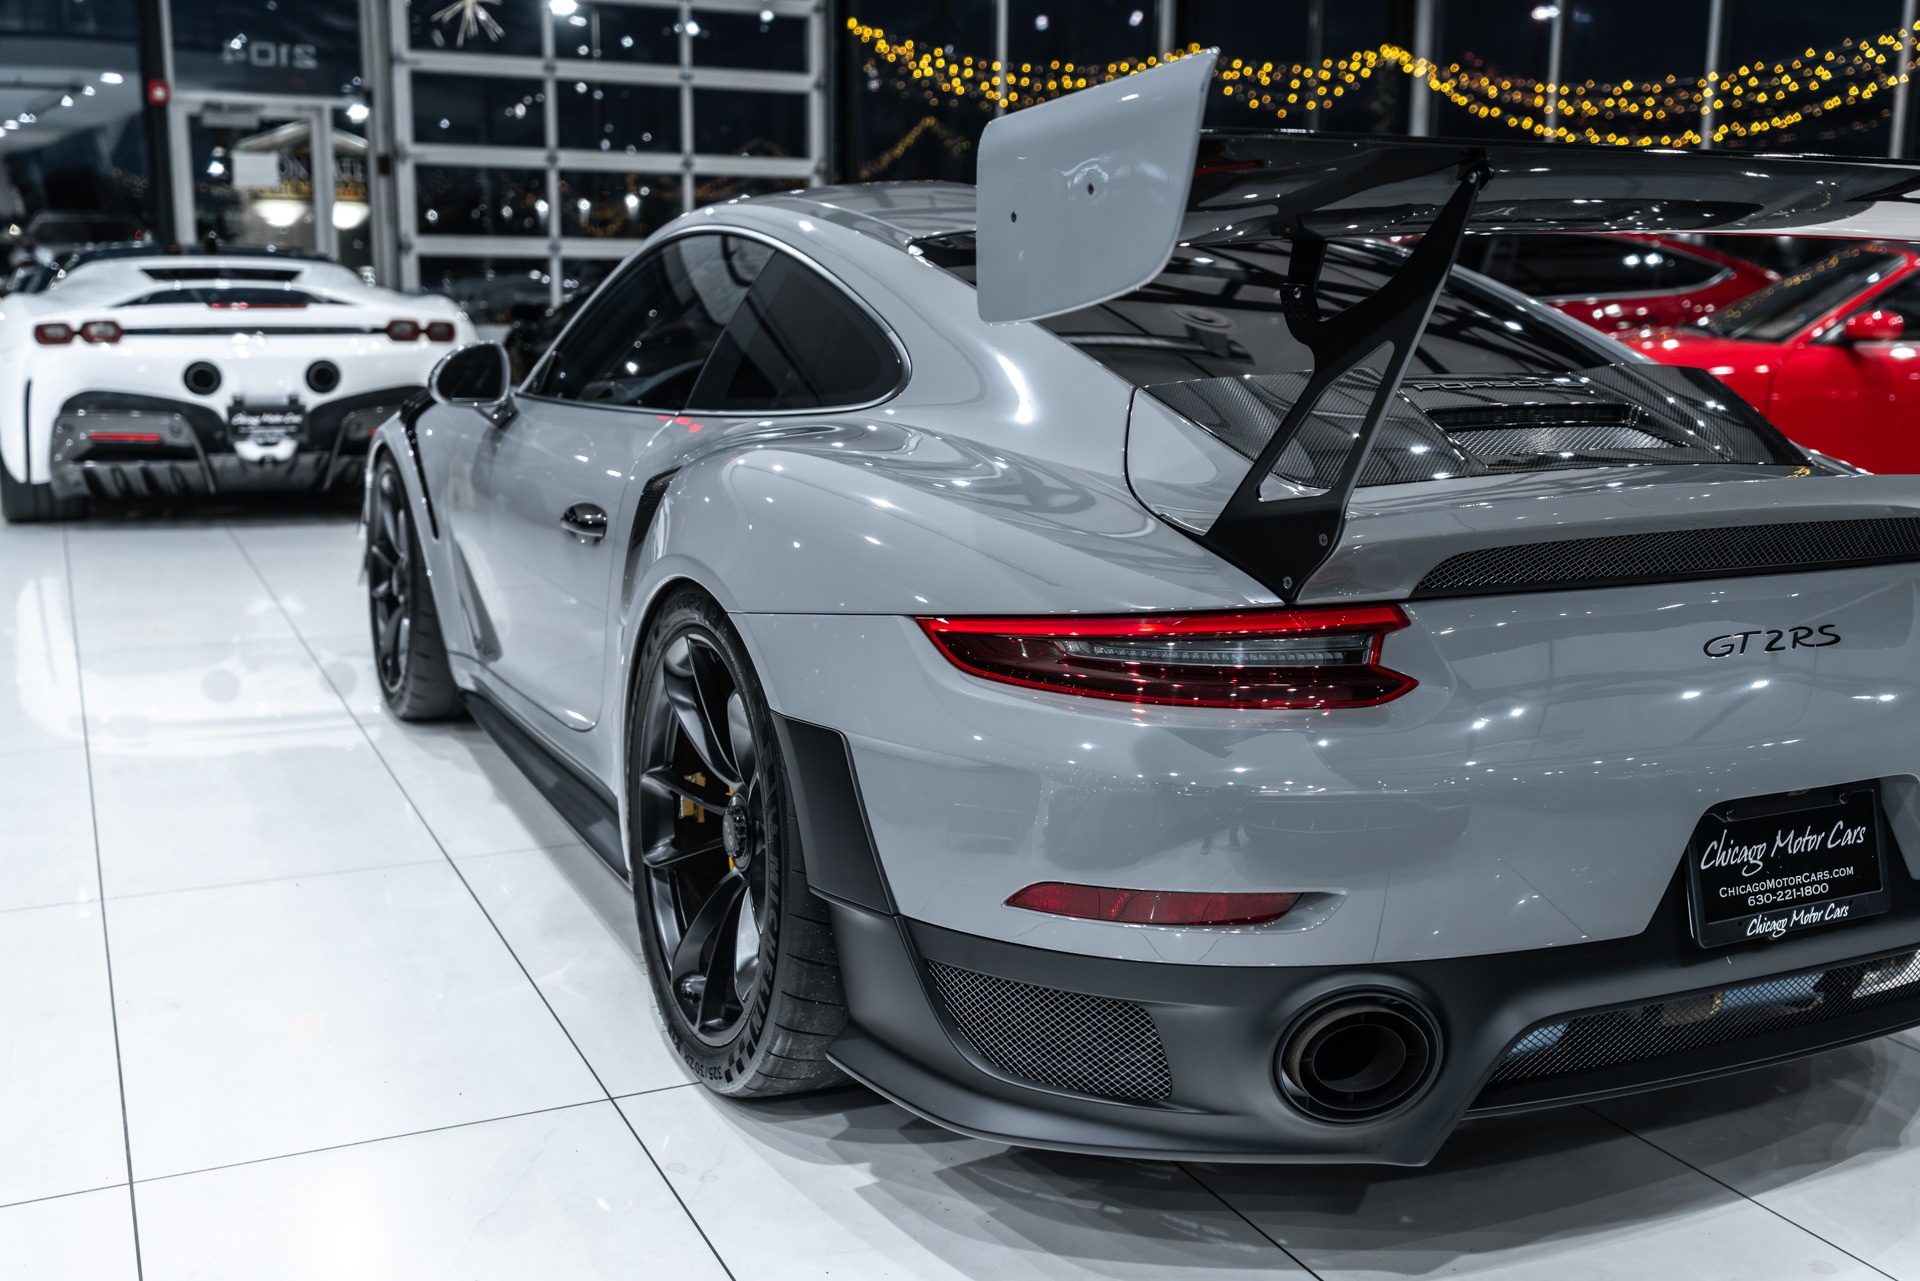 Used 2018 Porsche 911 GT2 RS PTS Fashion Grey! TONS of Carbon! $76 